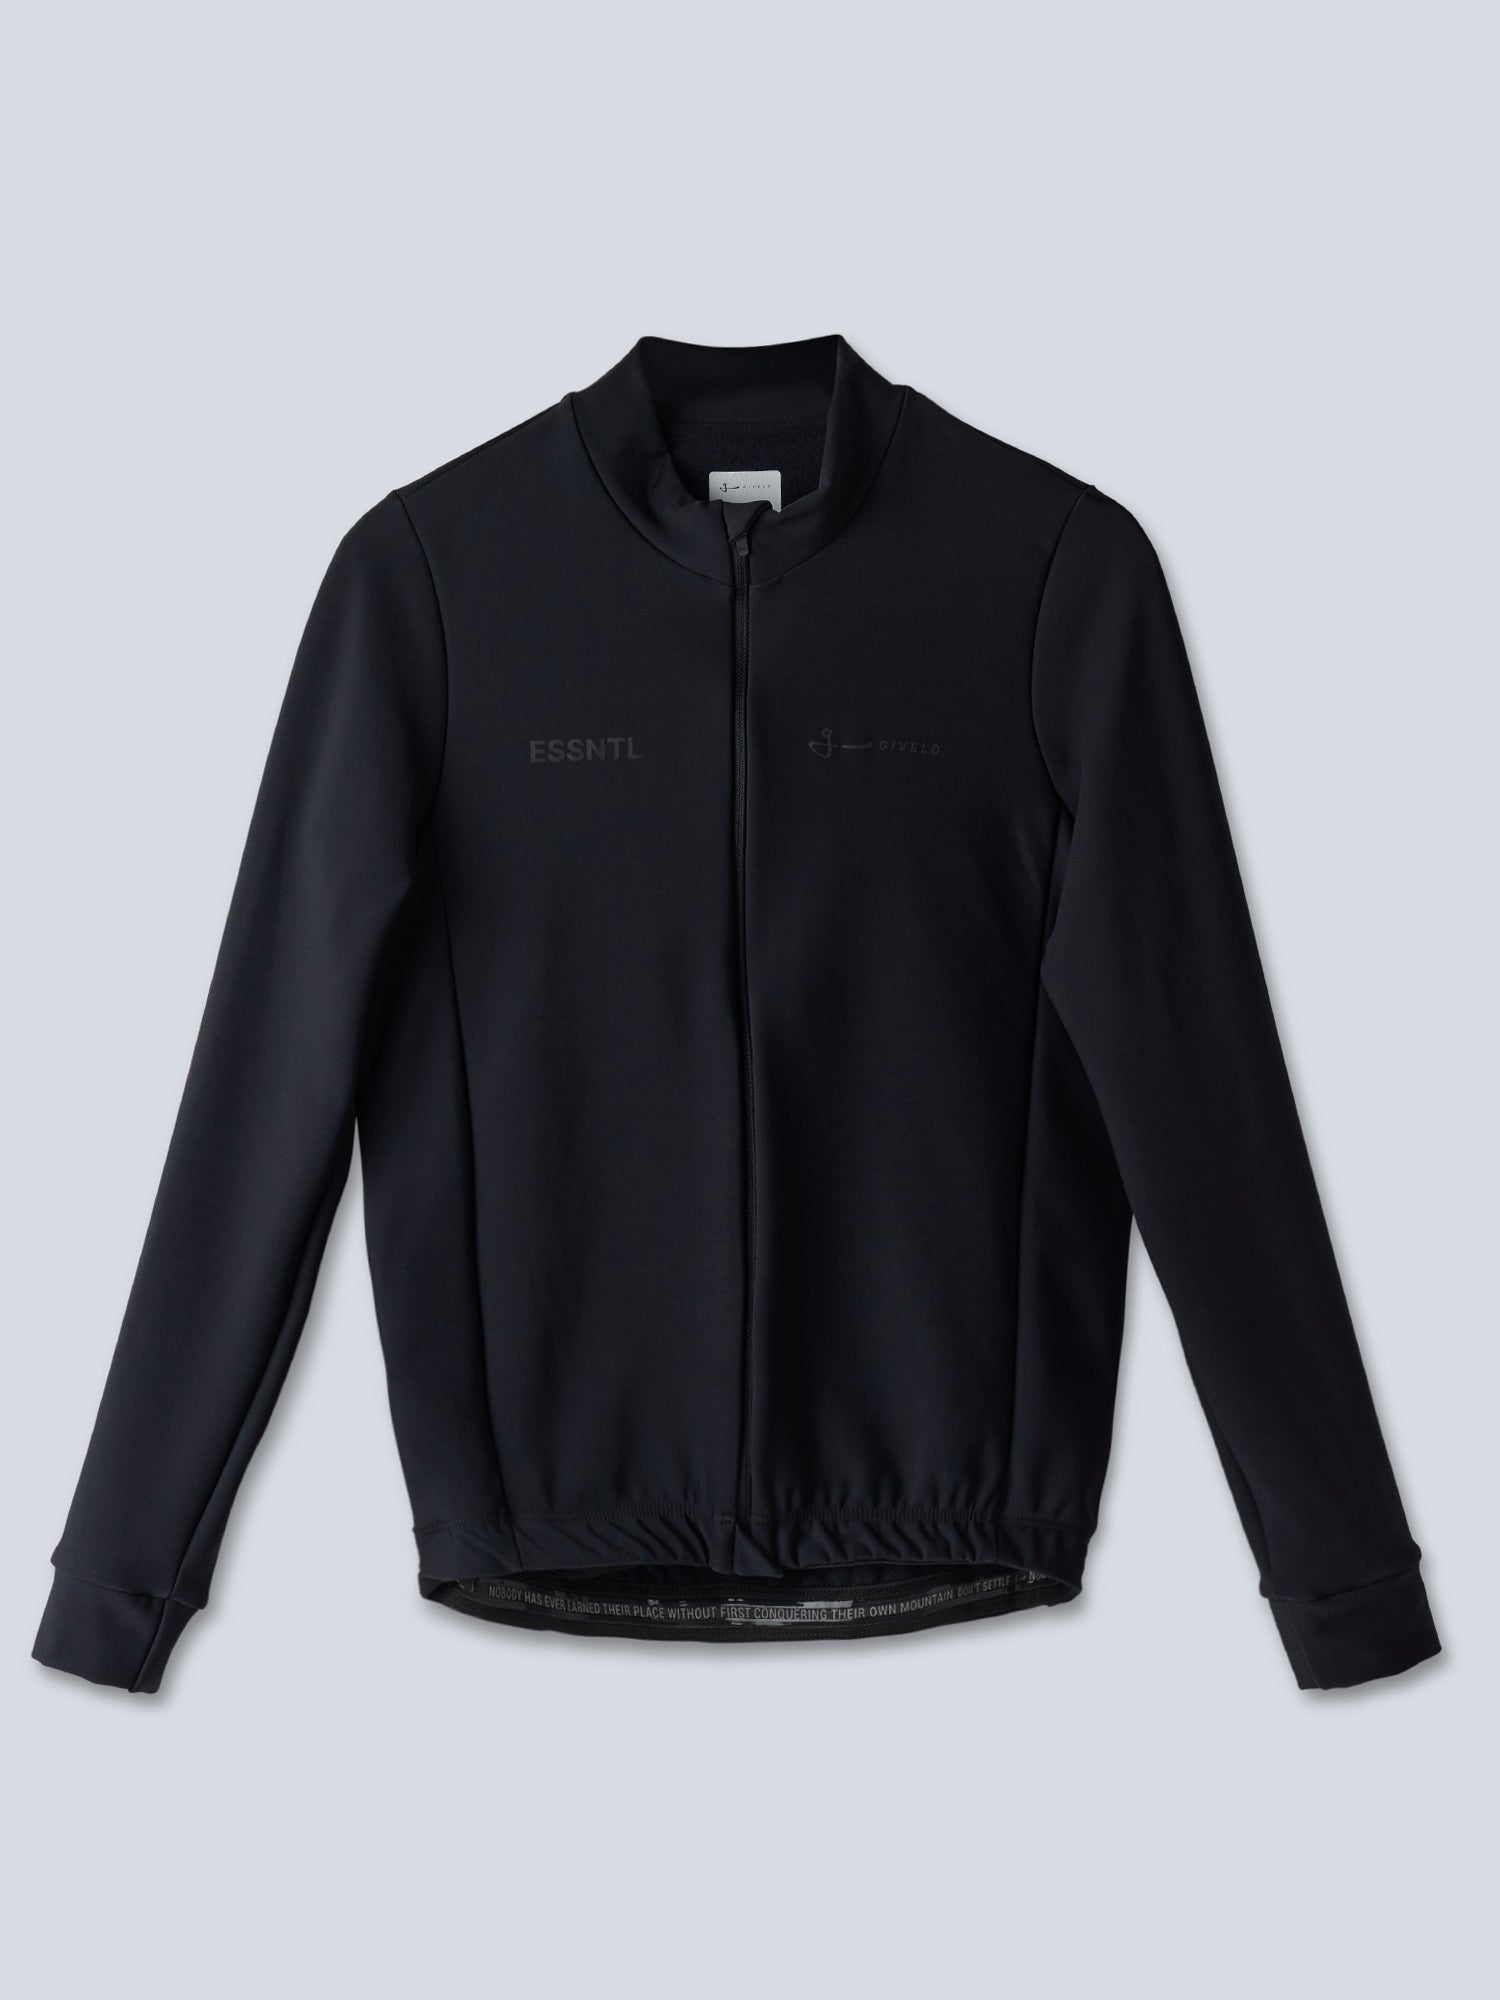 Givelo - Jersey Thermal C.D.A Blackout - velocartel